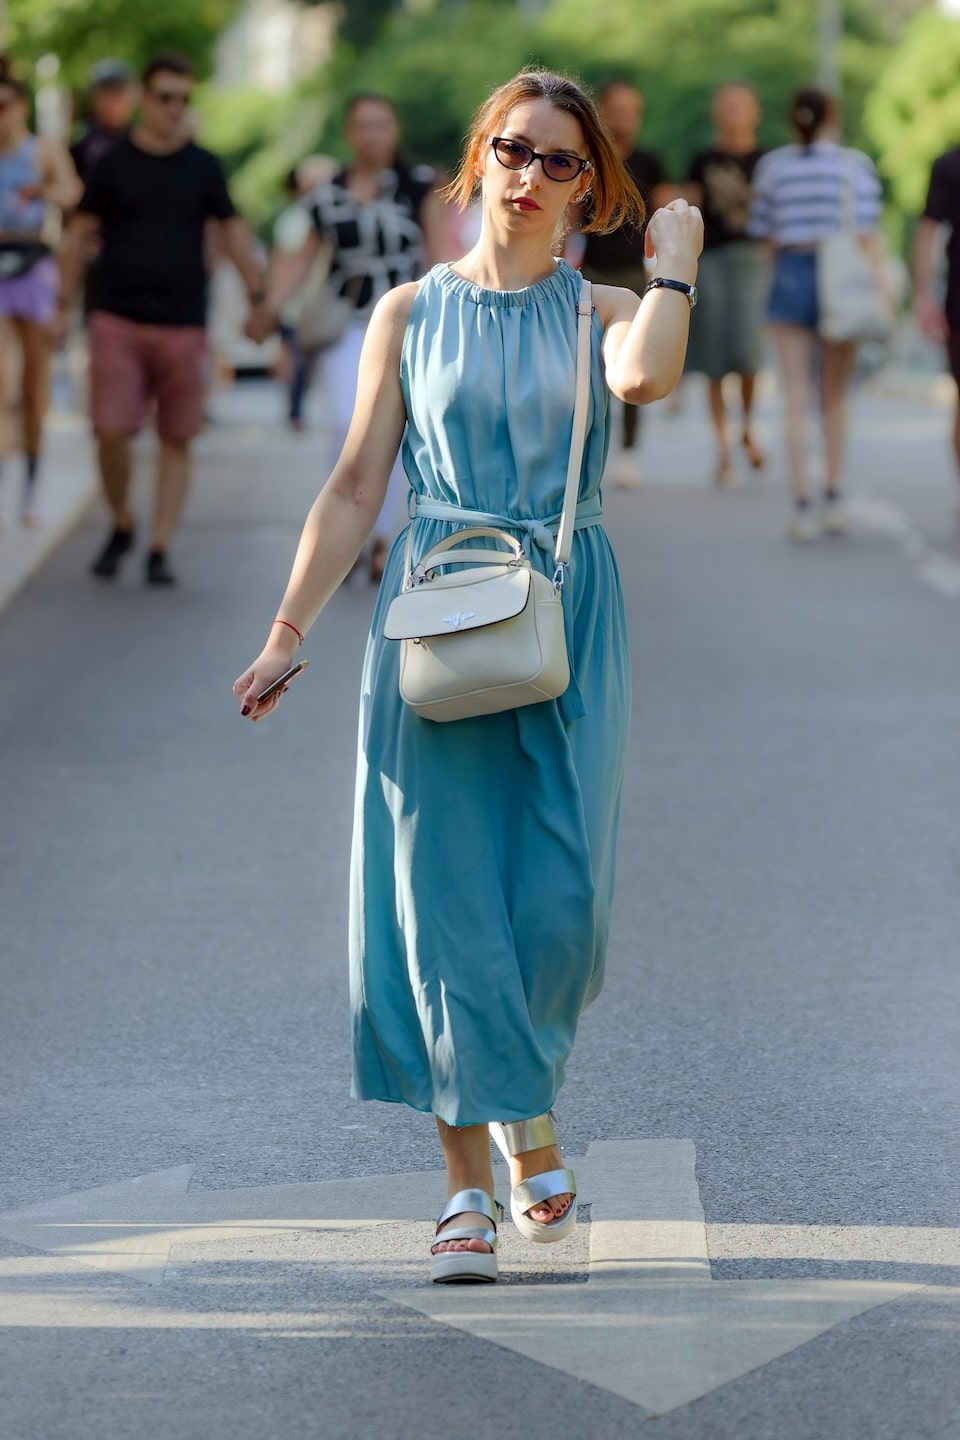 lady walking with purse